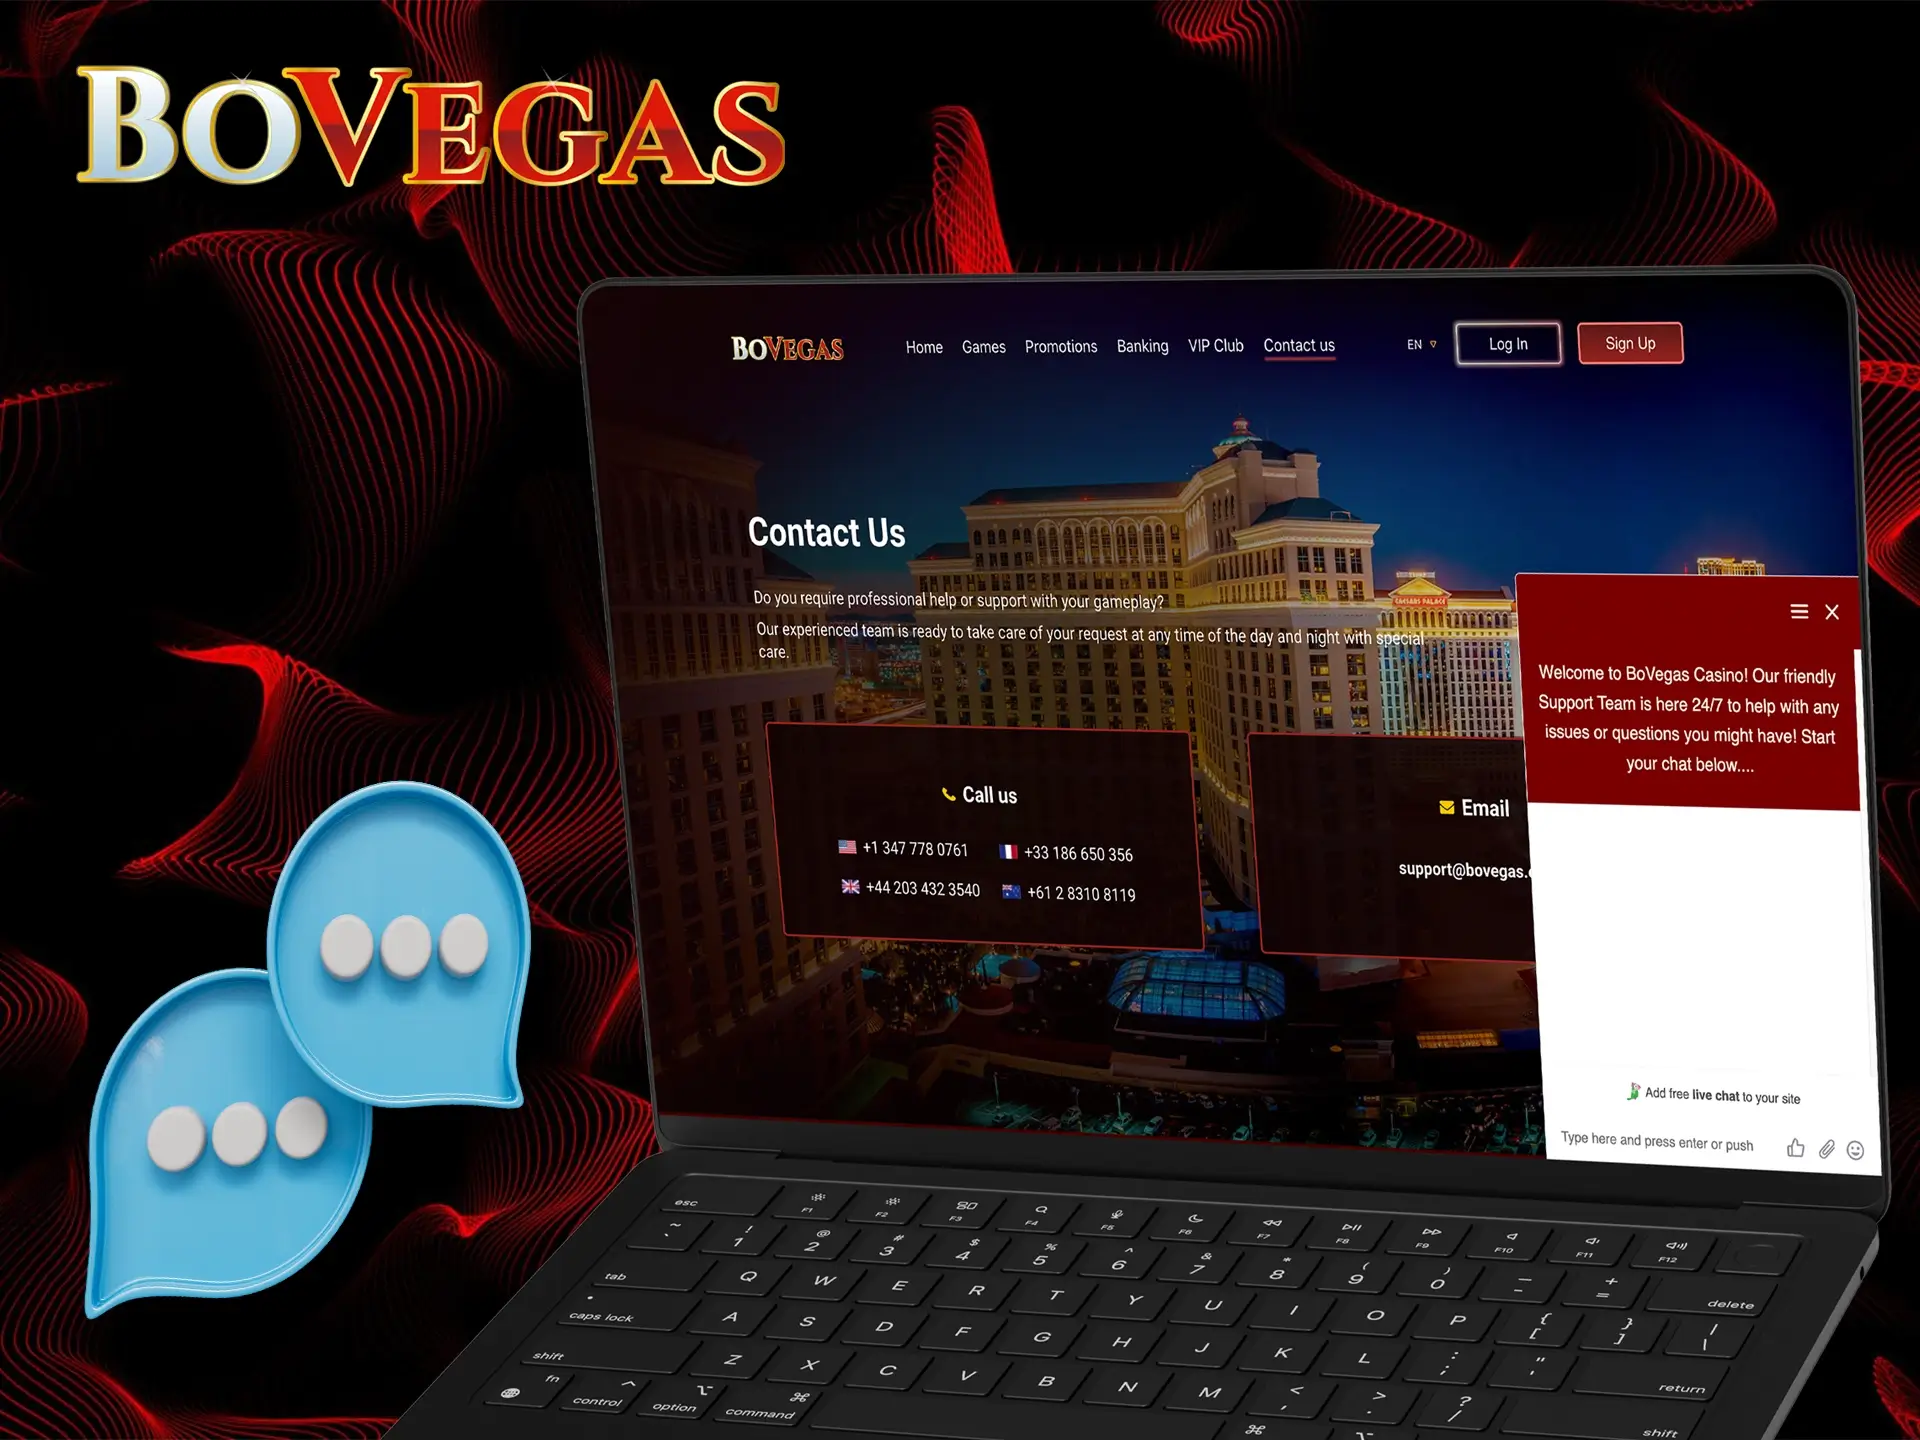 Use the BoVegas casino service and ask your questions directly to the company chat.